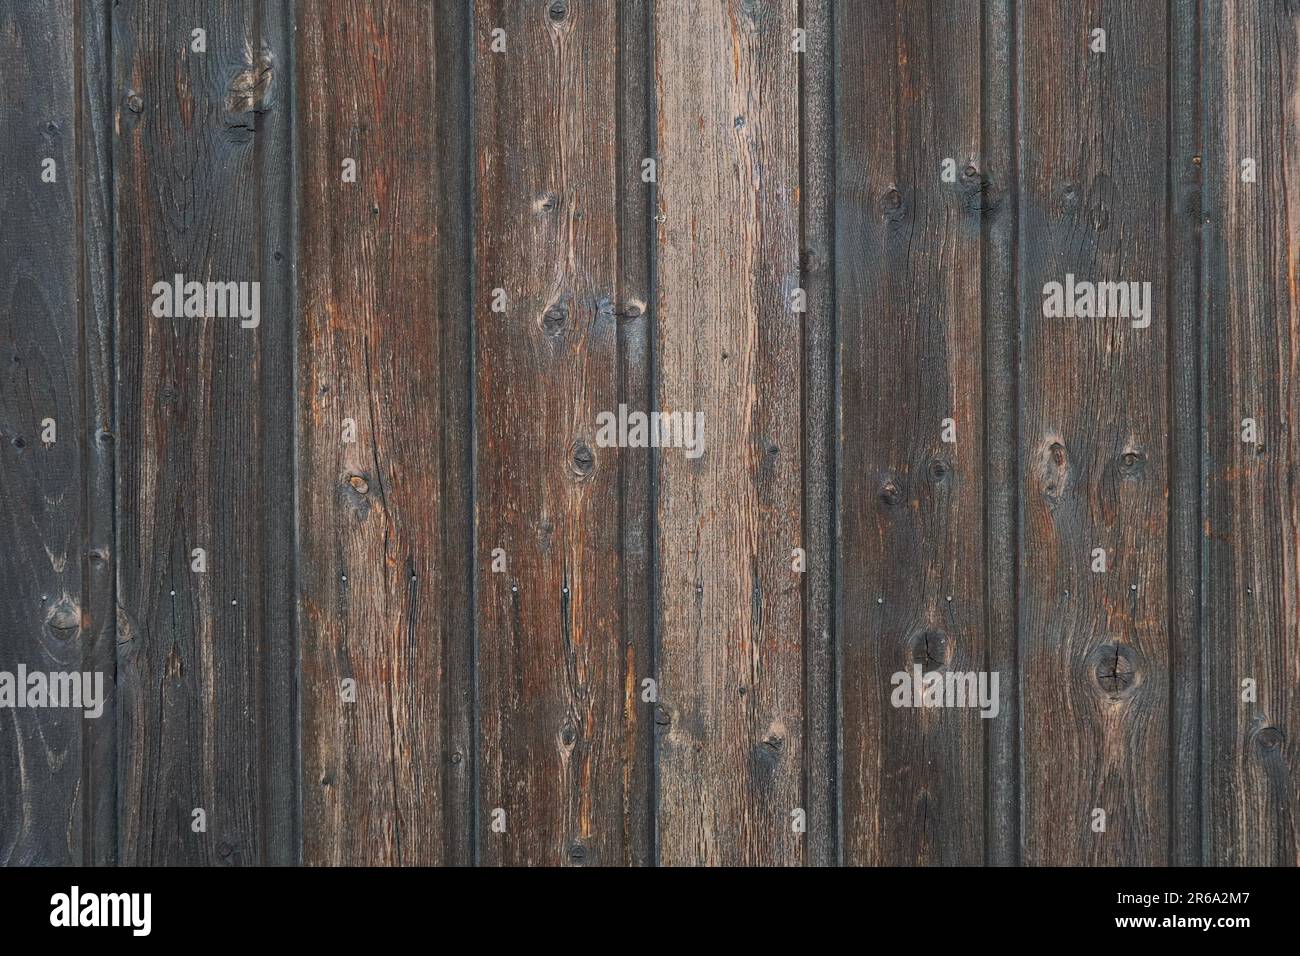 old weathered distressed dark brown wooden boarding wood texture background Stock Photo